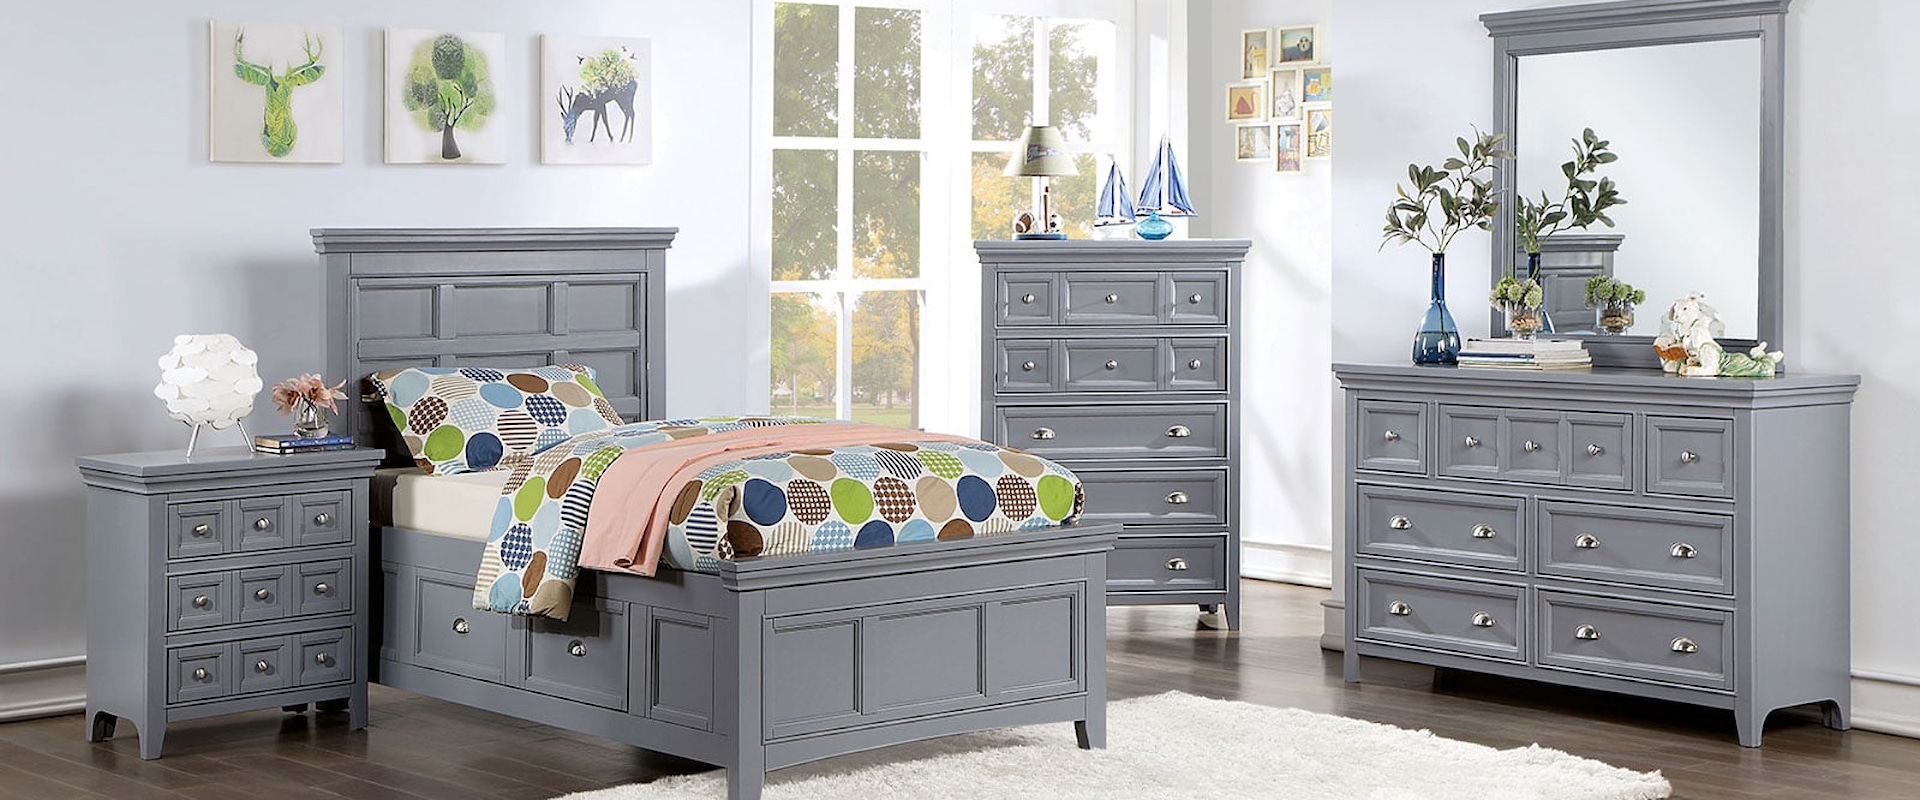 Transitional 4-Piece Twin Bedroom Set